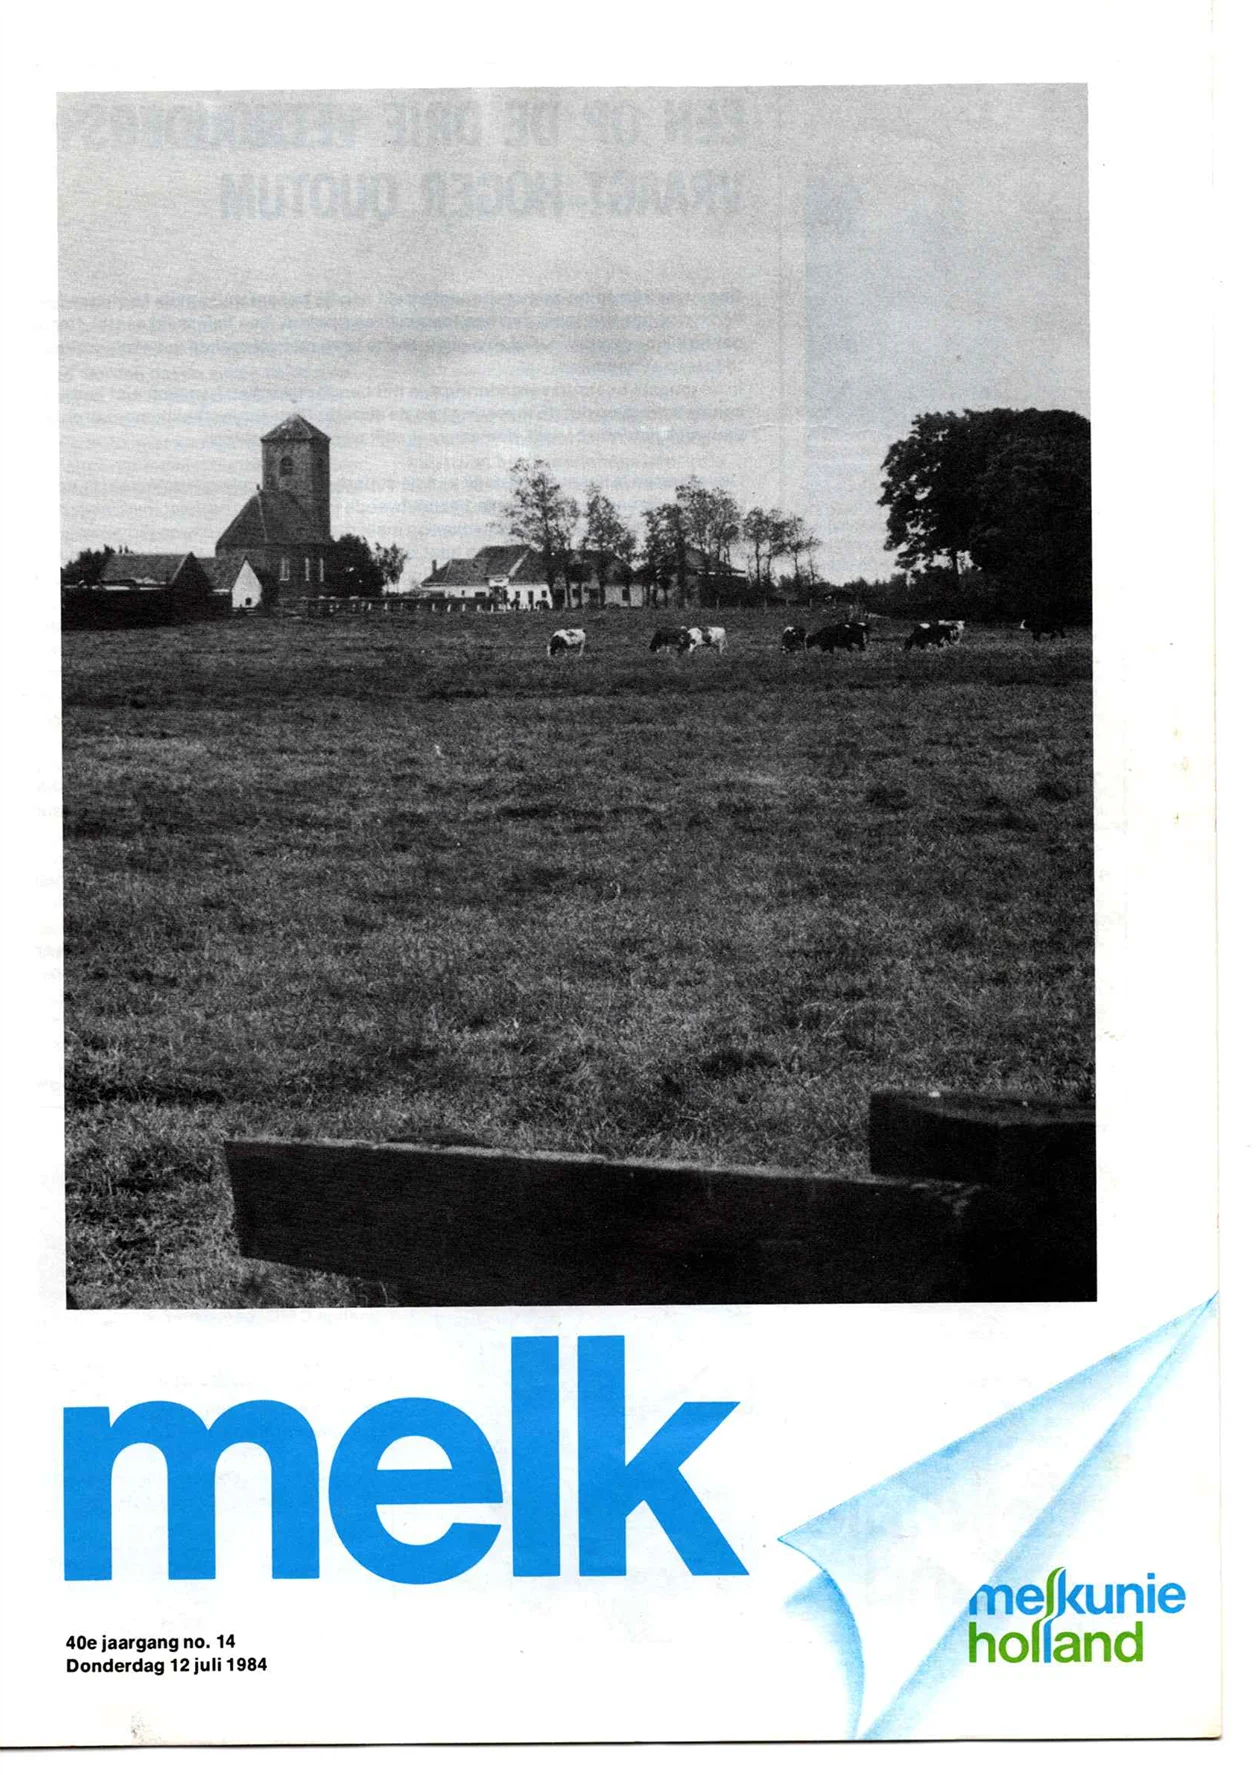 Melkunie Holland Magazine front page , The Netherlands, field with cows and a church